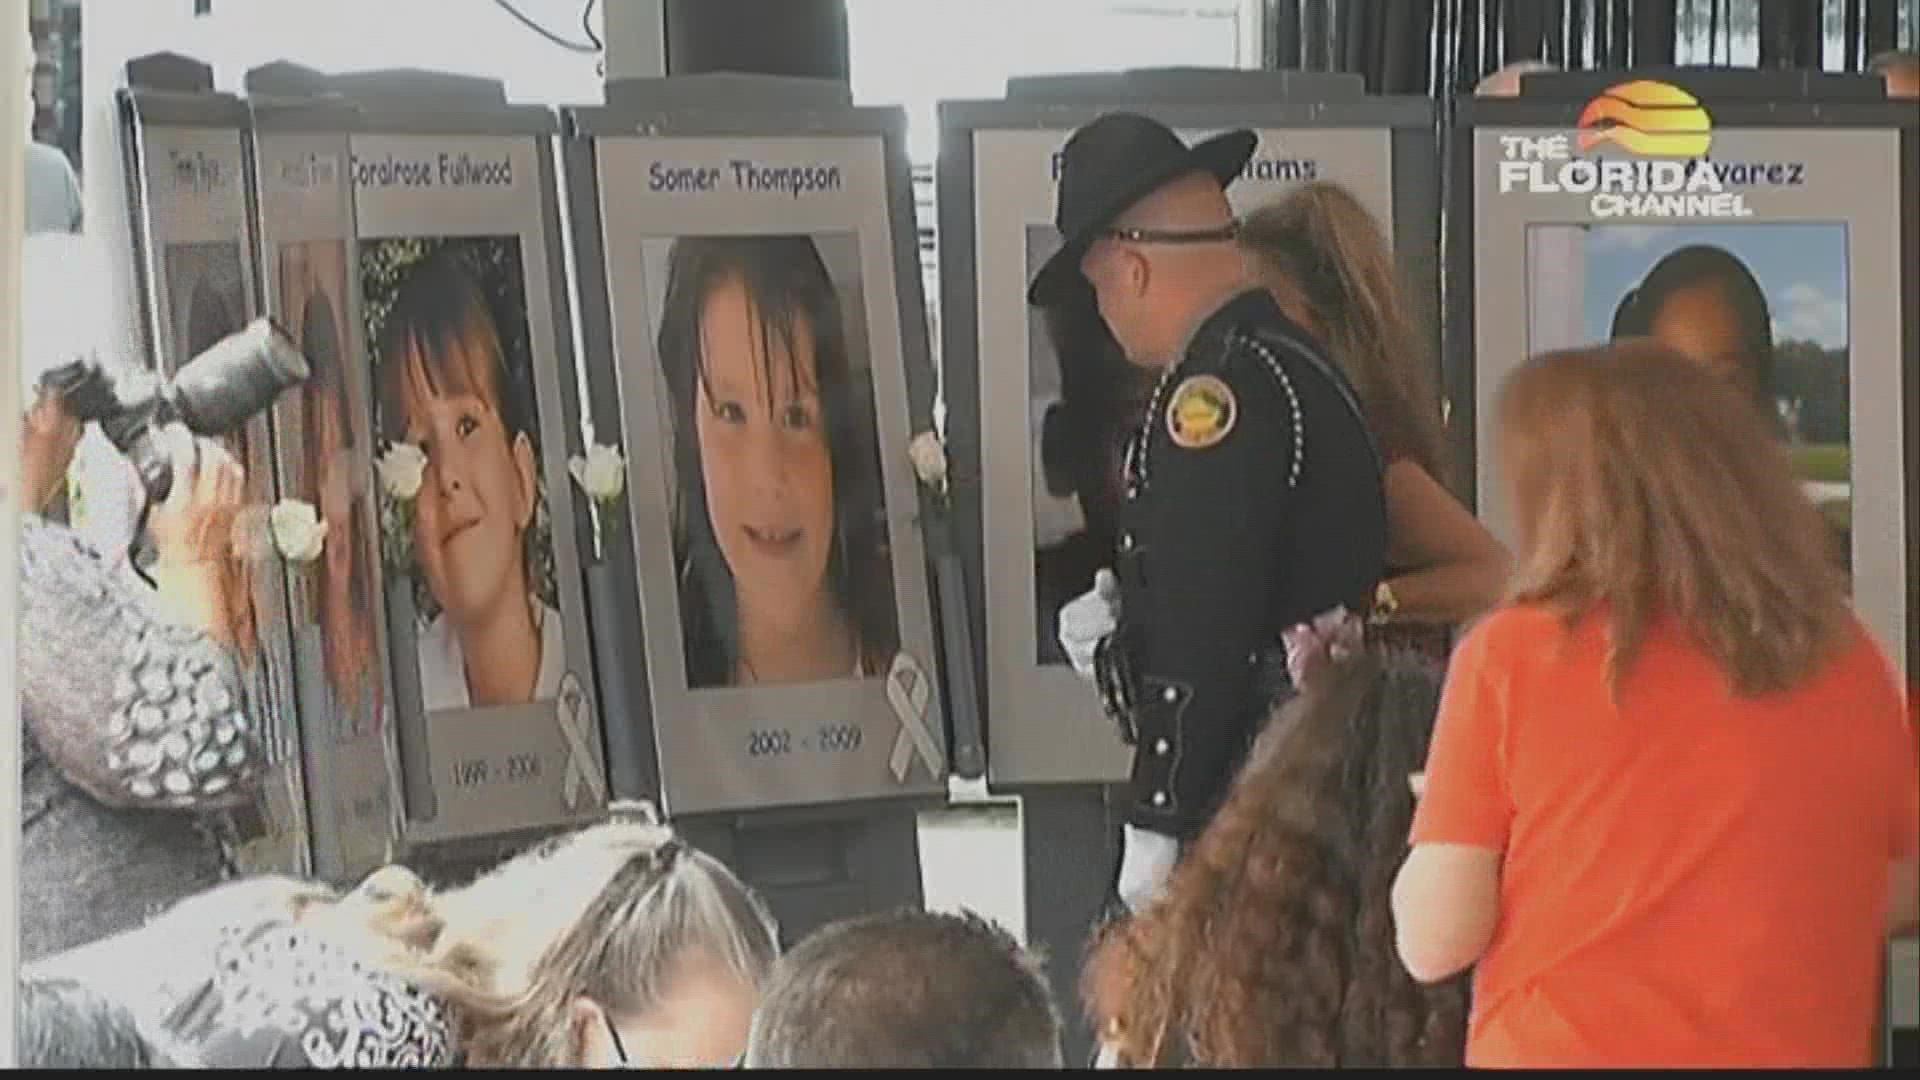 During the ceremony, law enforcement officers, child heroes and others are recognized for acting to rescue missing children or prevent abductions.